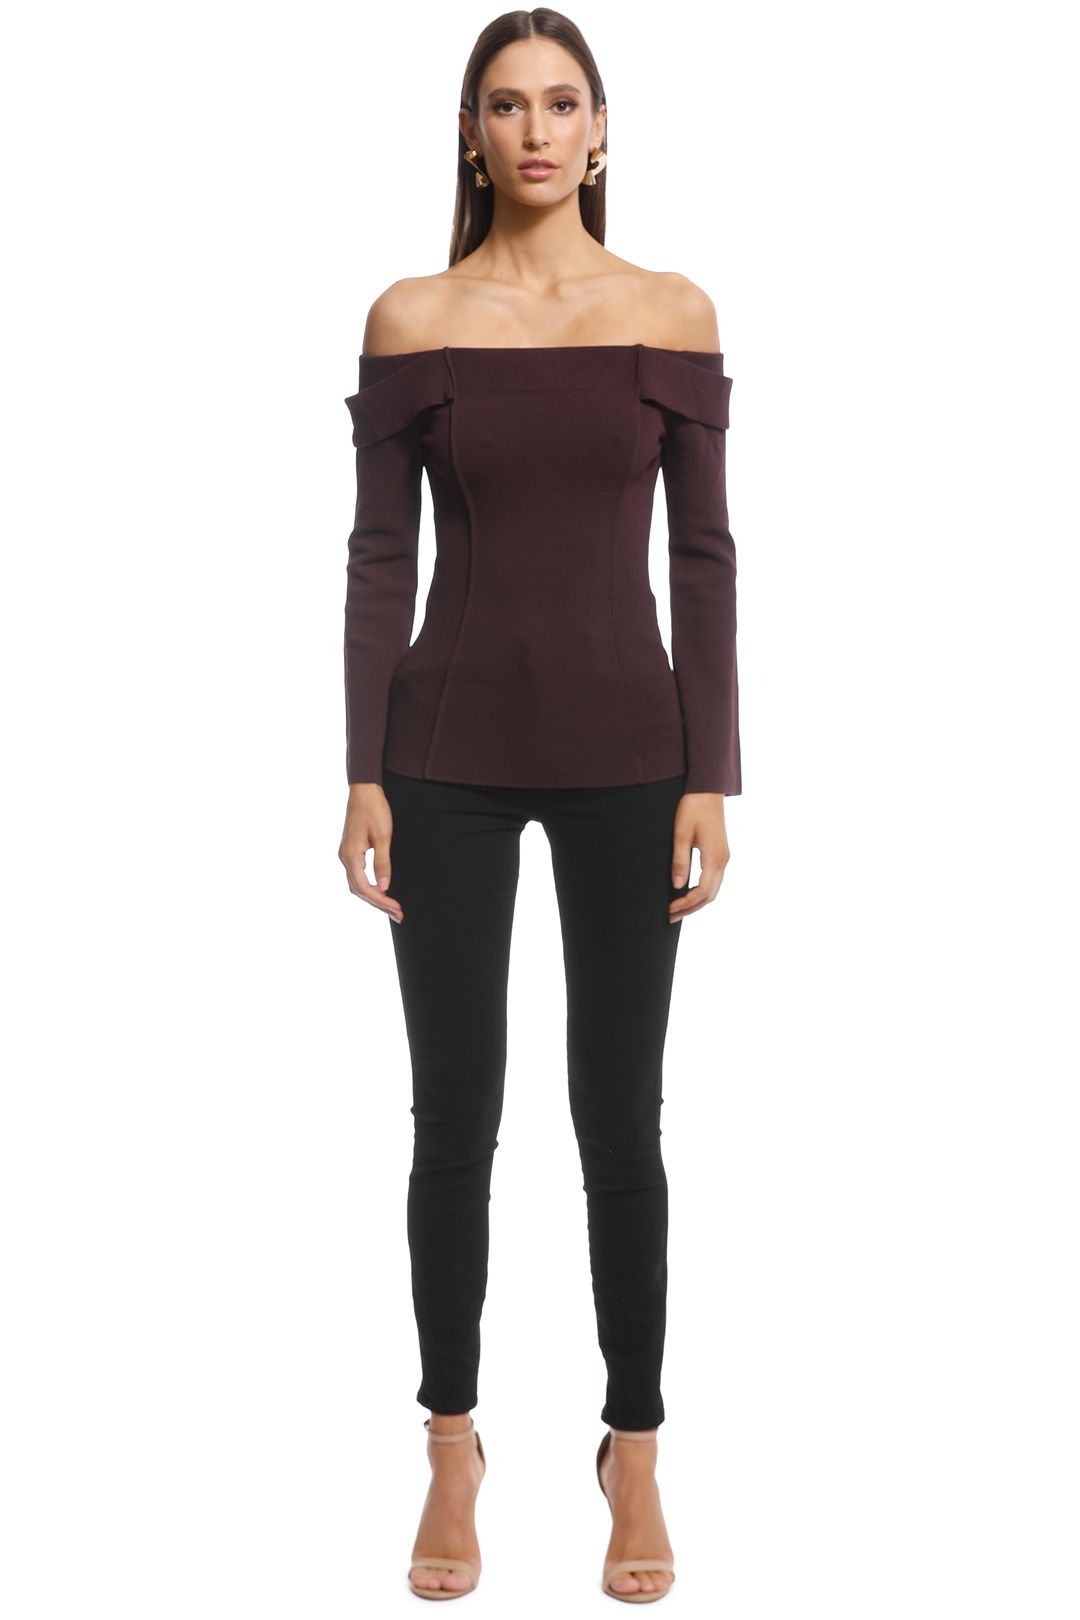 Camilla and Marc - Carole Knit Top - Burgundy - Front